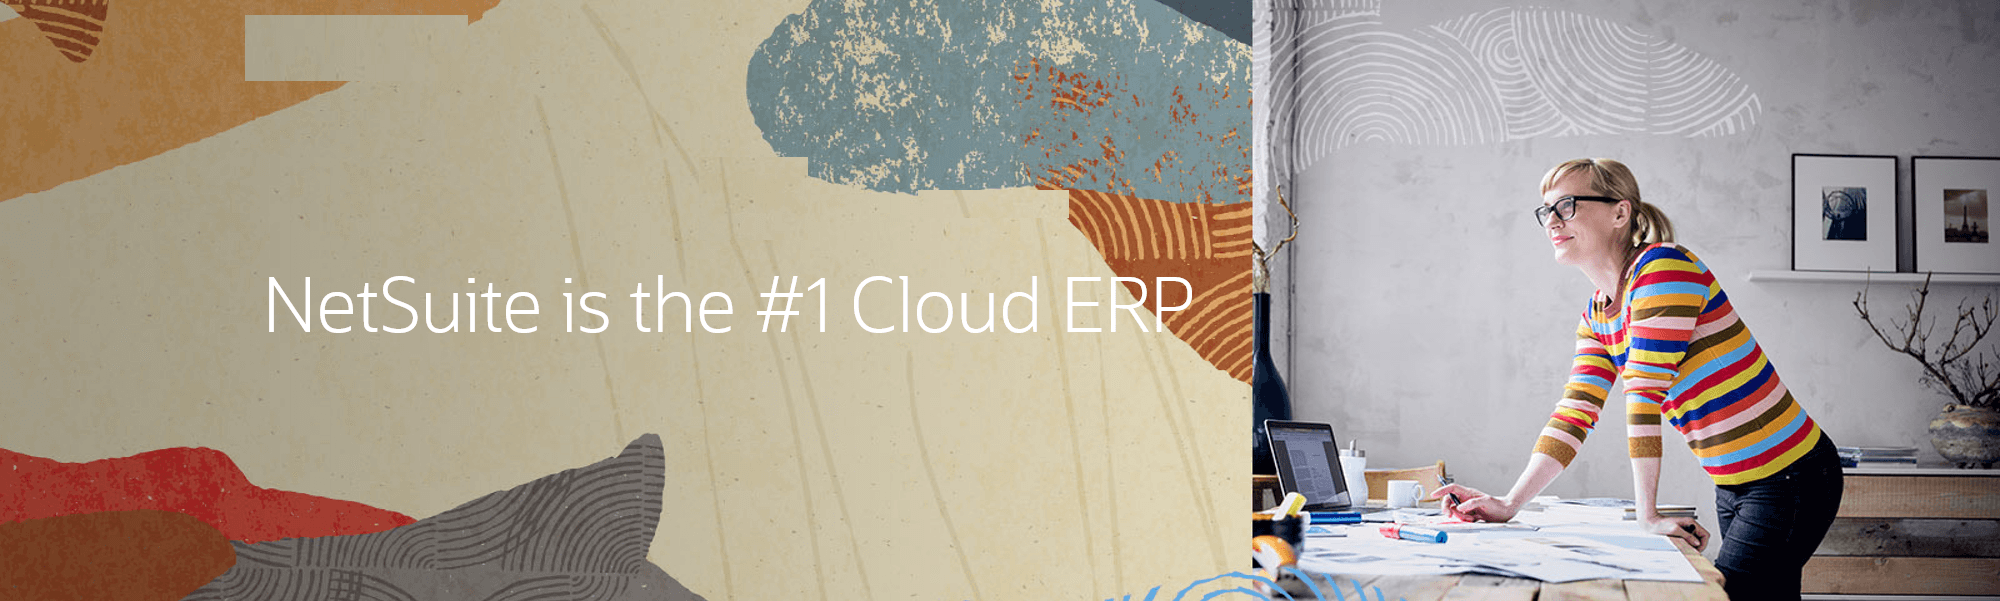 Review NetSuite: The #1 Cloud ERP for implementing your scalability - Appvizer